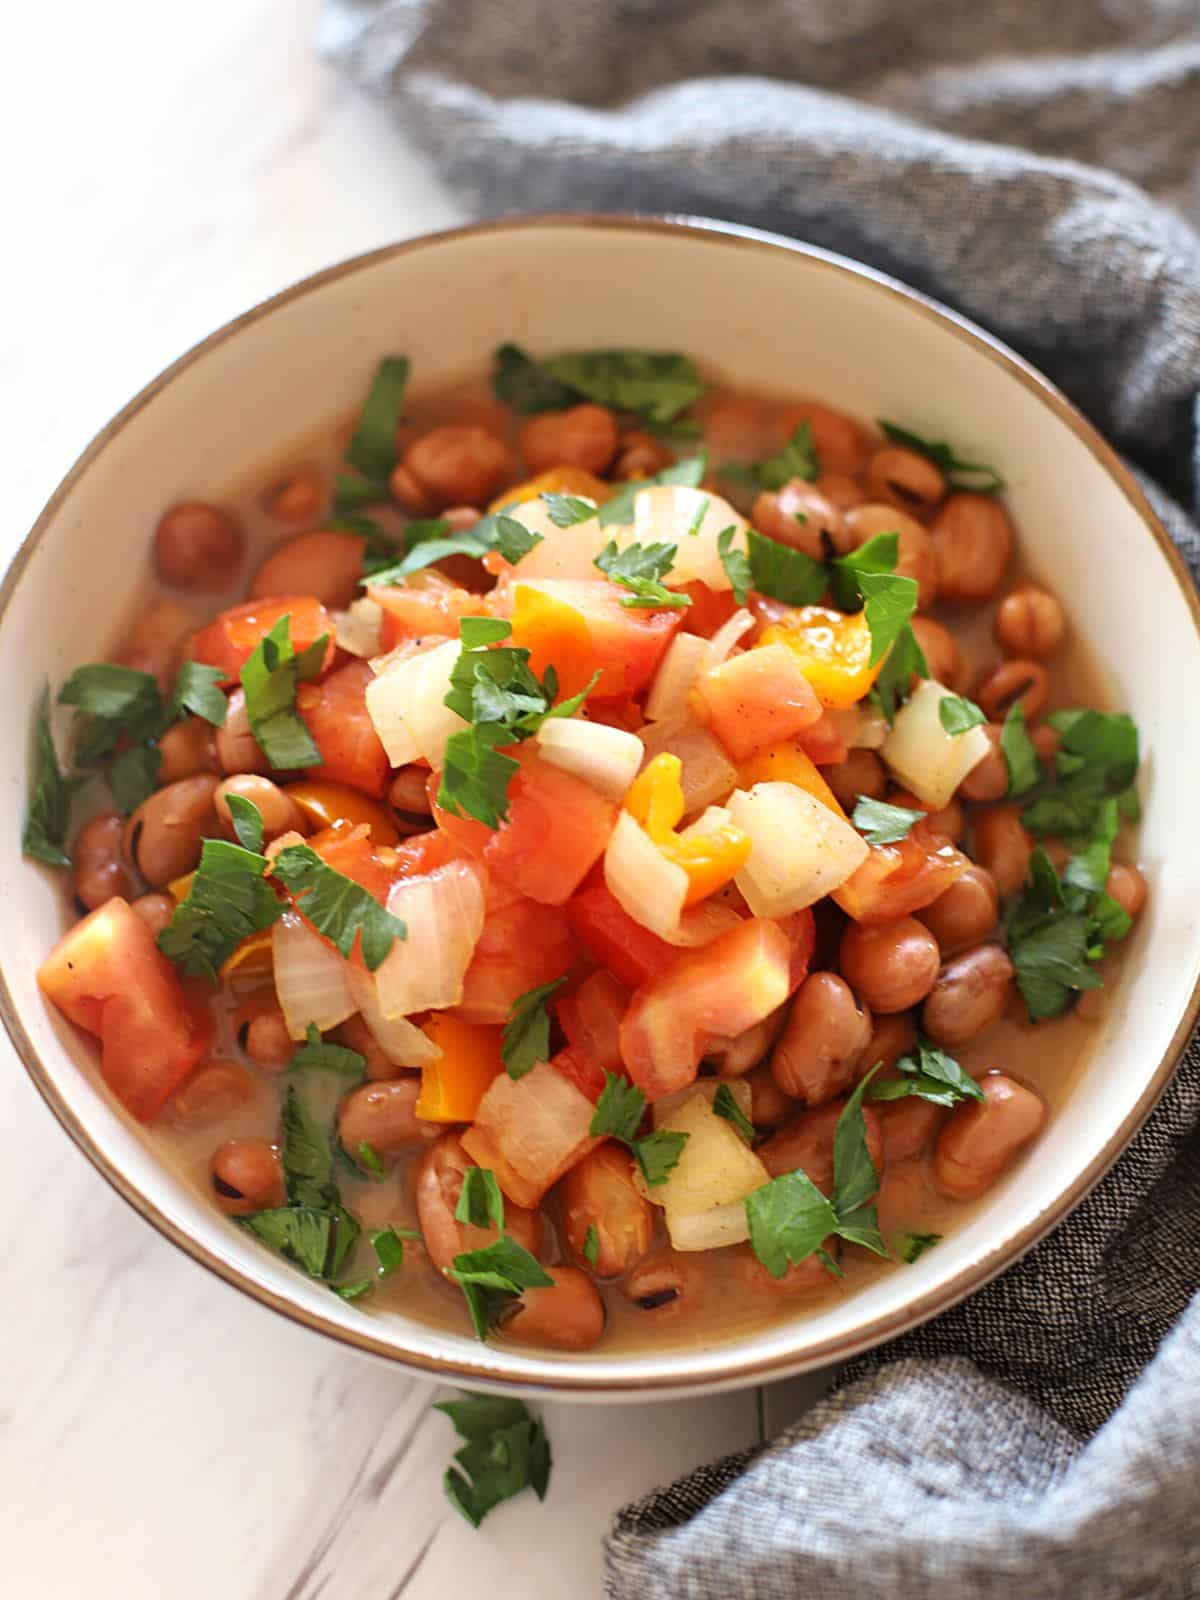 A bowl of ful medames with vegetables.